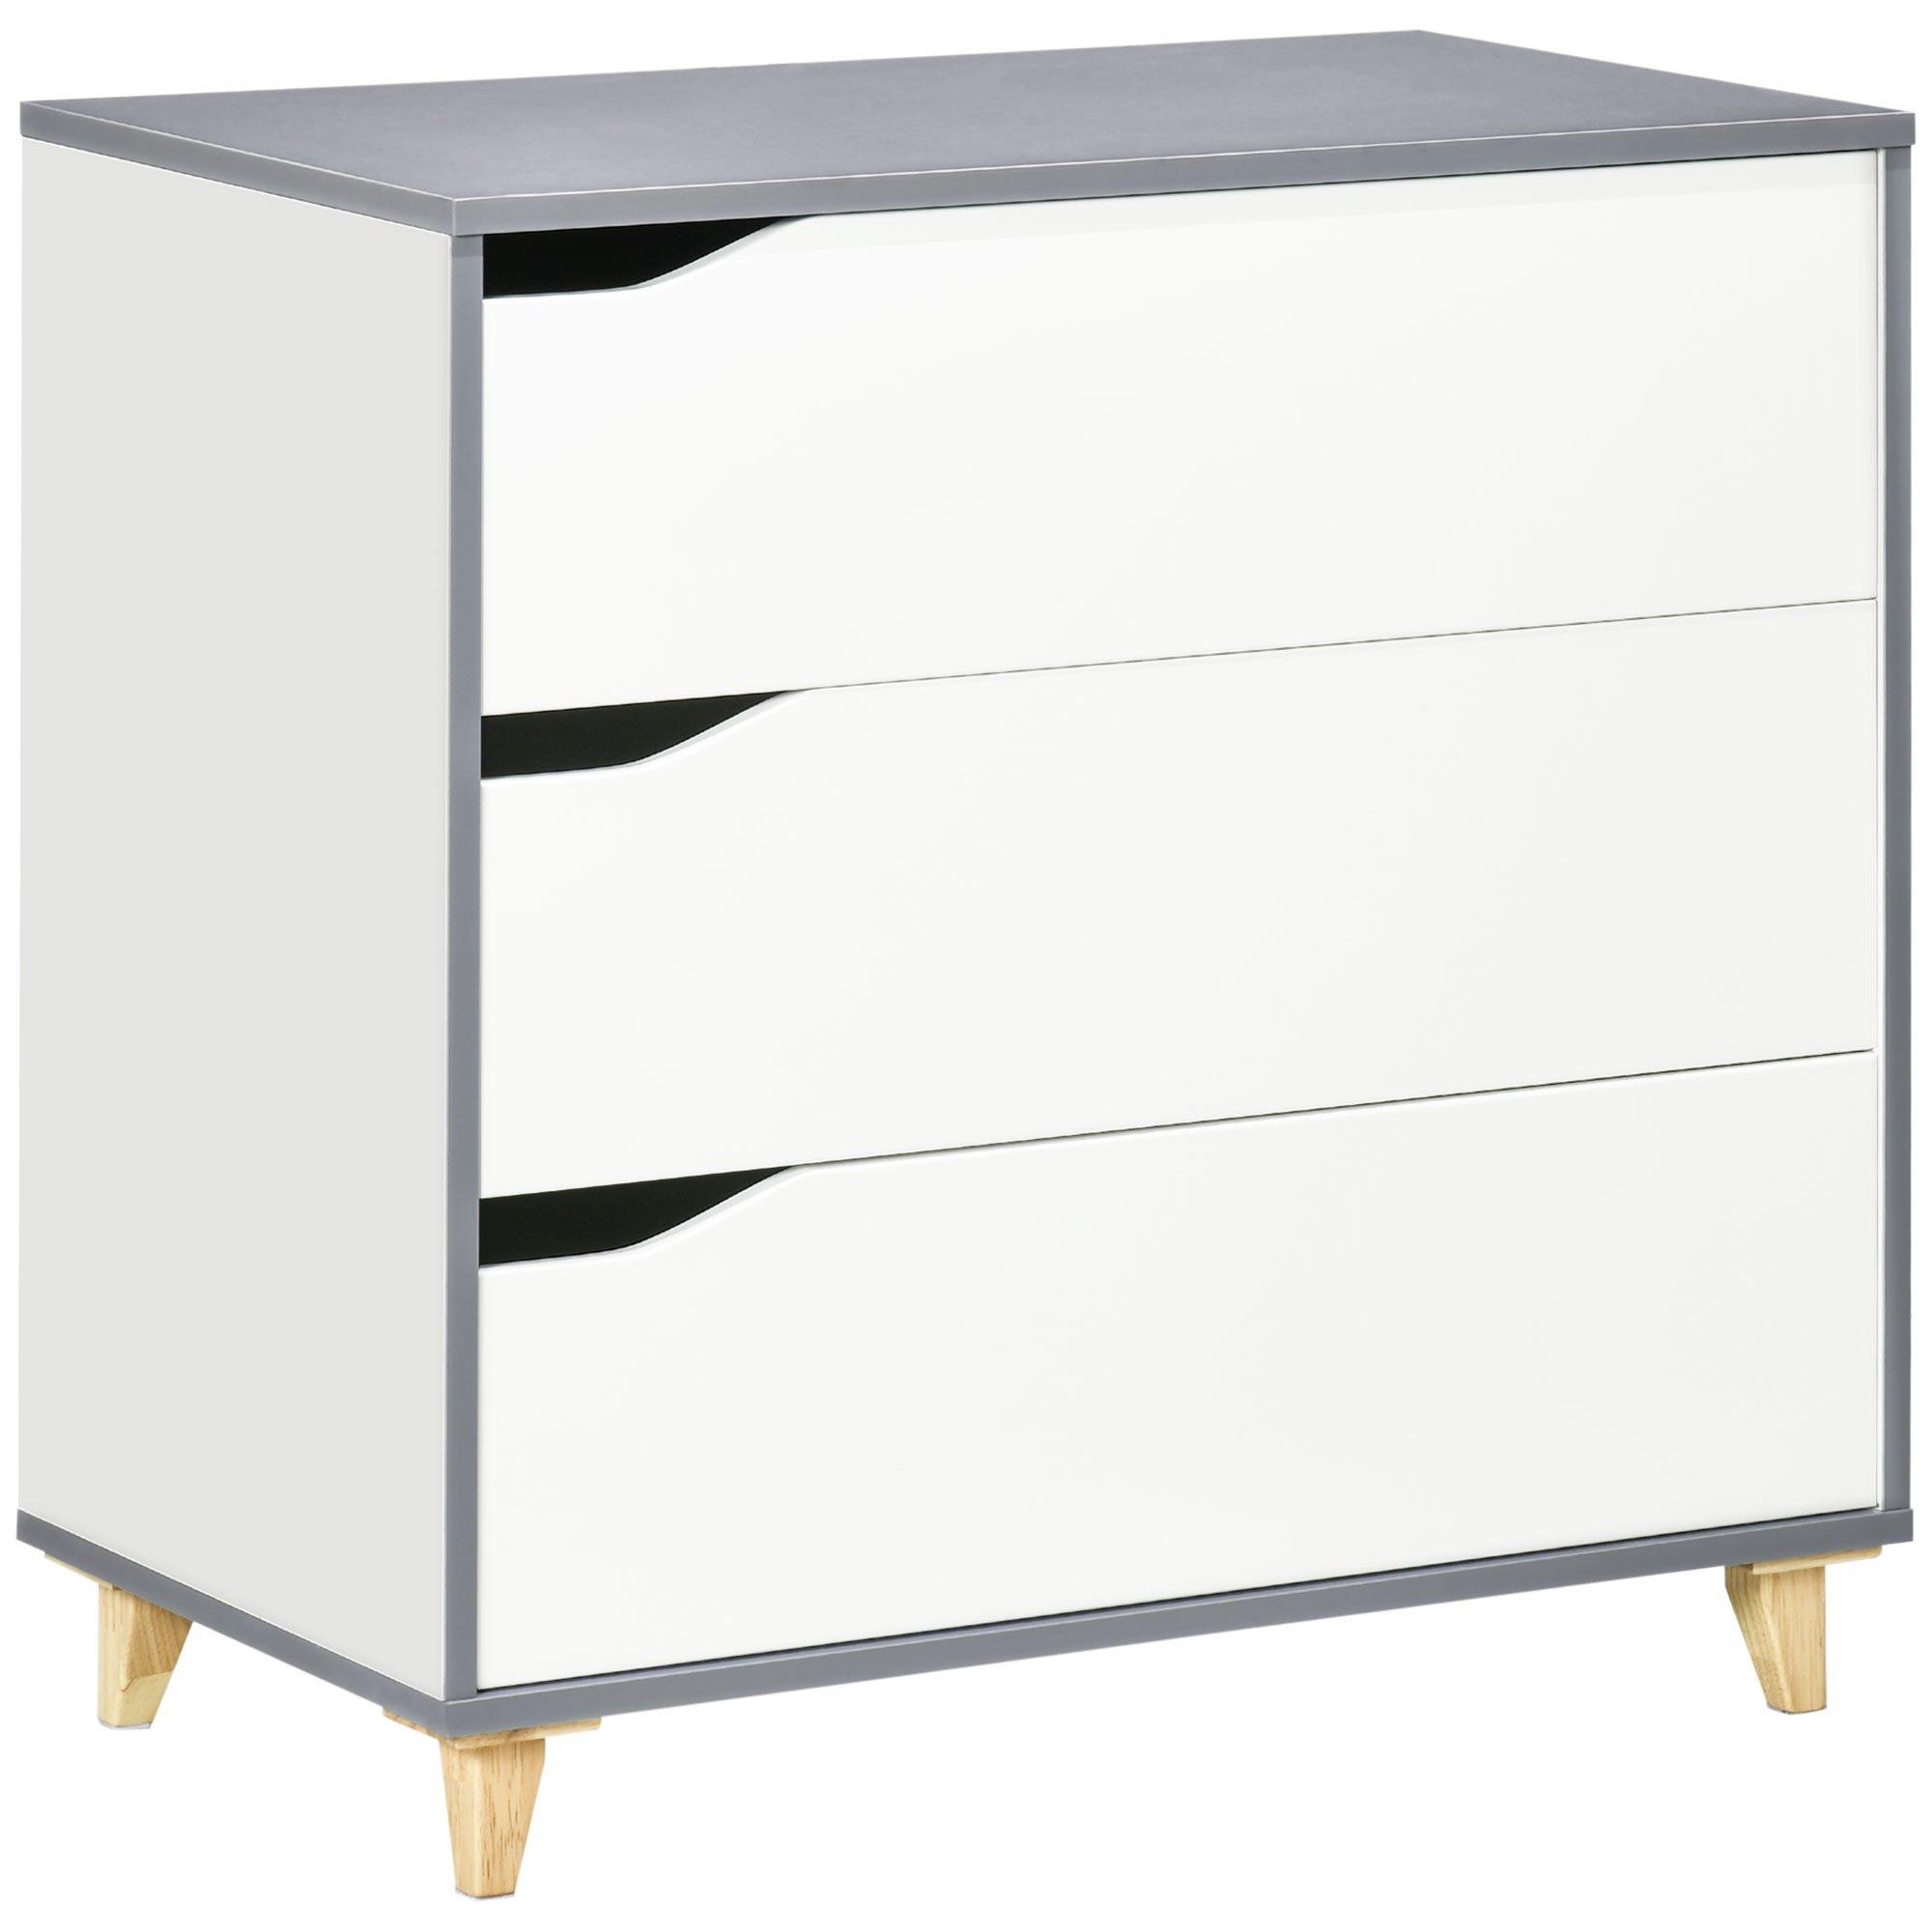 Chest of Drawers 3 Drawer Dresser Storage Cabinet with Solid Wood